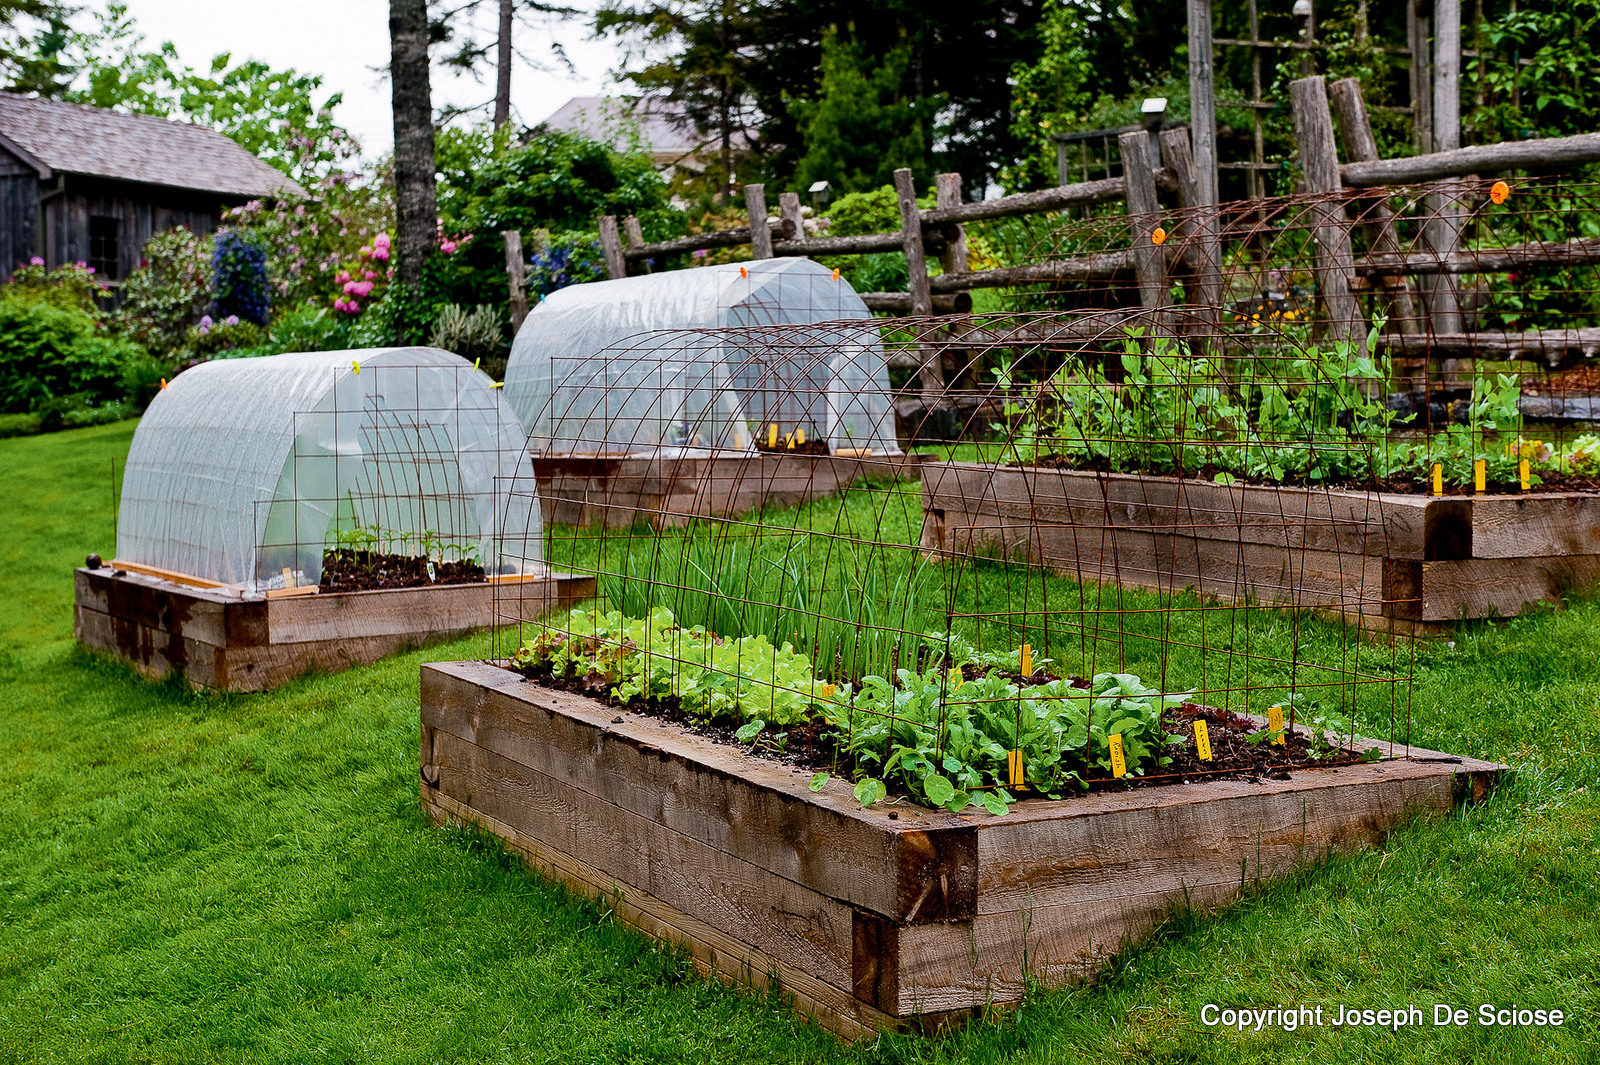 how to grow vegetables all year long (even in winter!)